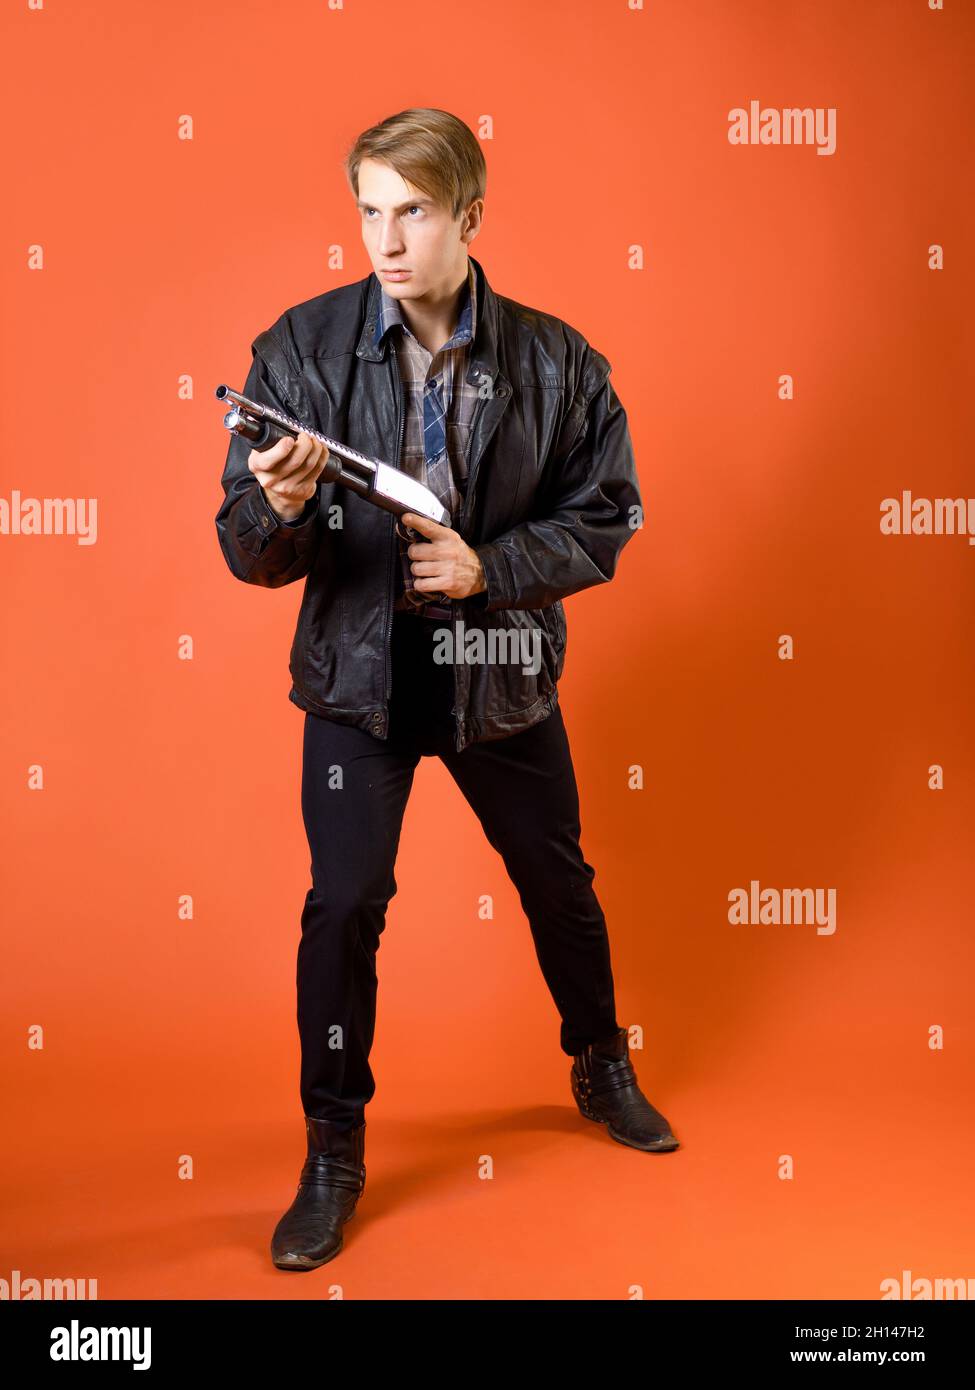 a cool hunter of evil spirits, a guy in a casual shirt and a leather jacket with a shotgun, ready to attack, a defensive stance, a studio photo on an Stock Photo